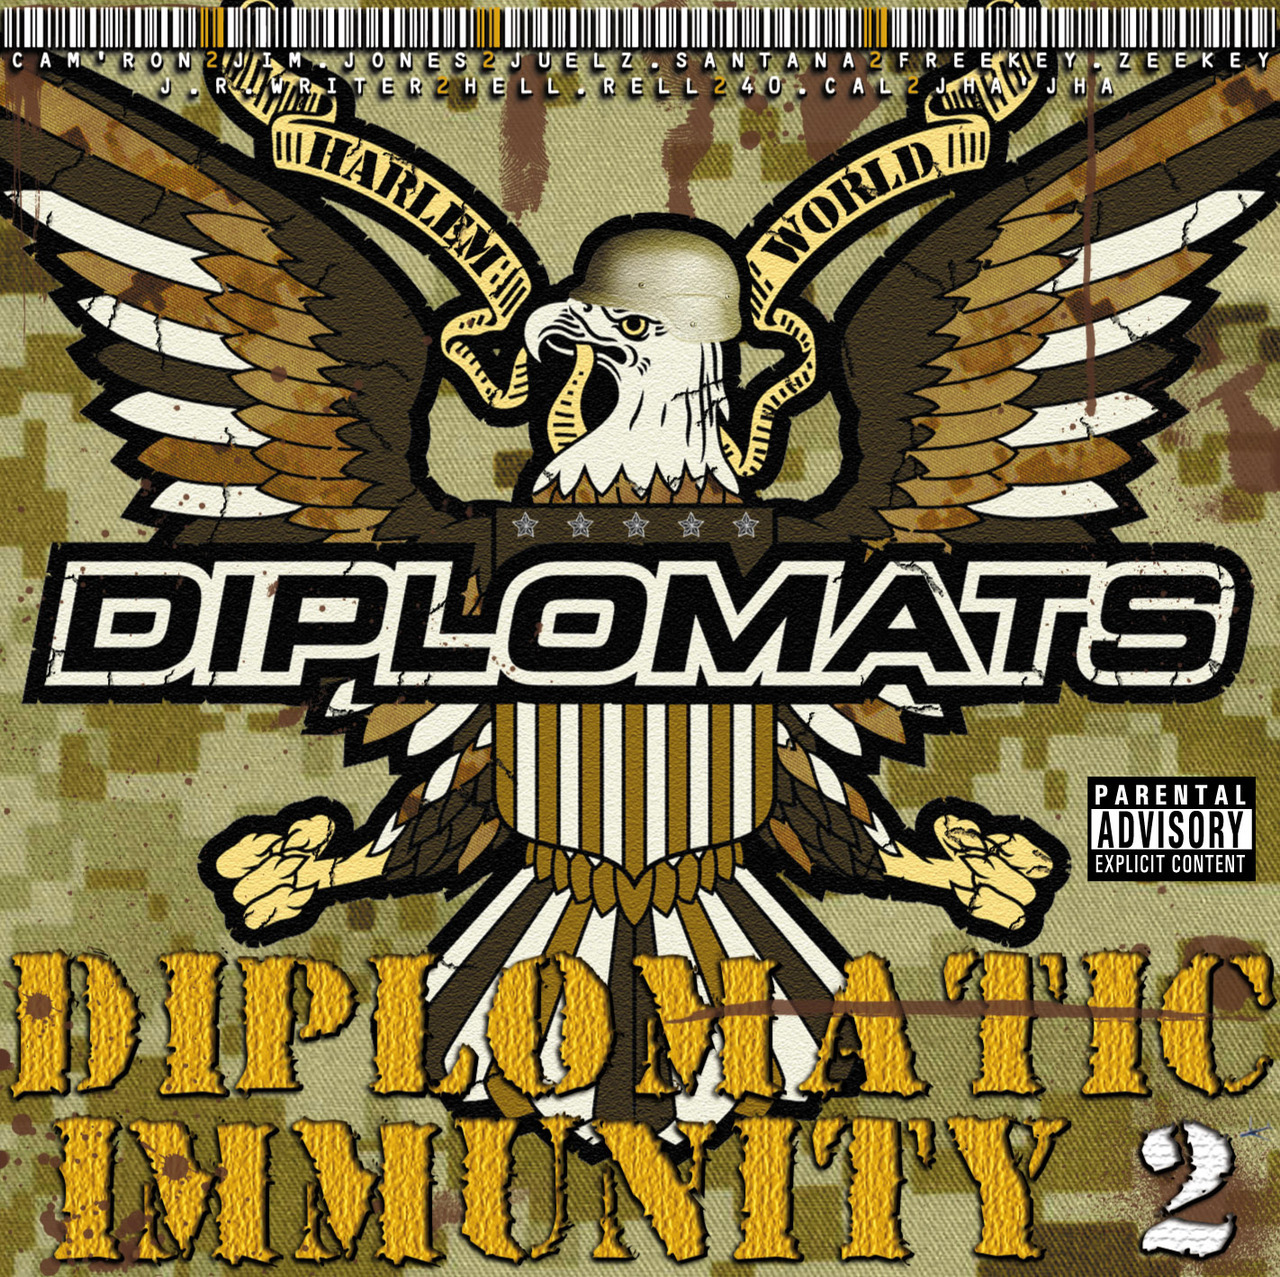 BACK IN THE DAY |11/23/04| The Diplomats released their second album, Diplomatic